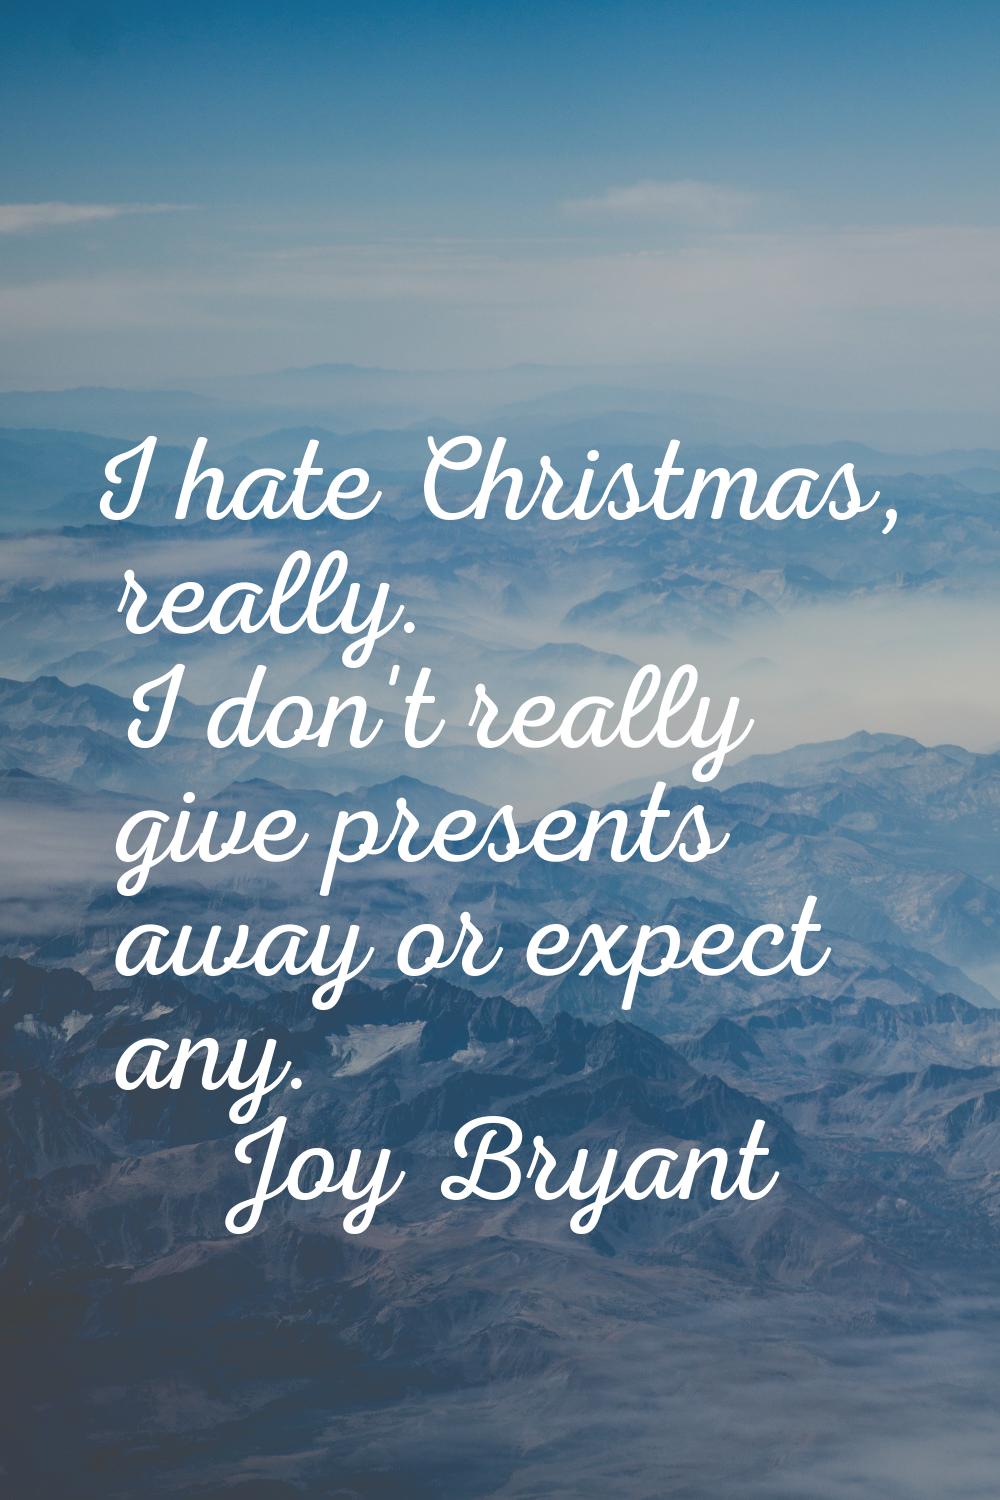 I hate Christmas, really. I don't really give presents away or expect any.